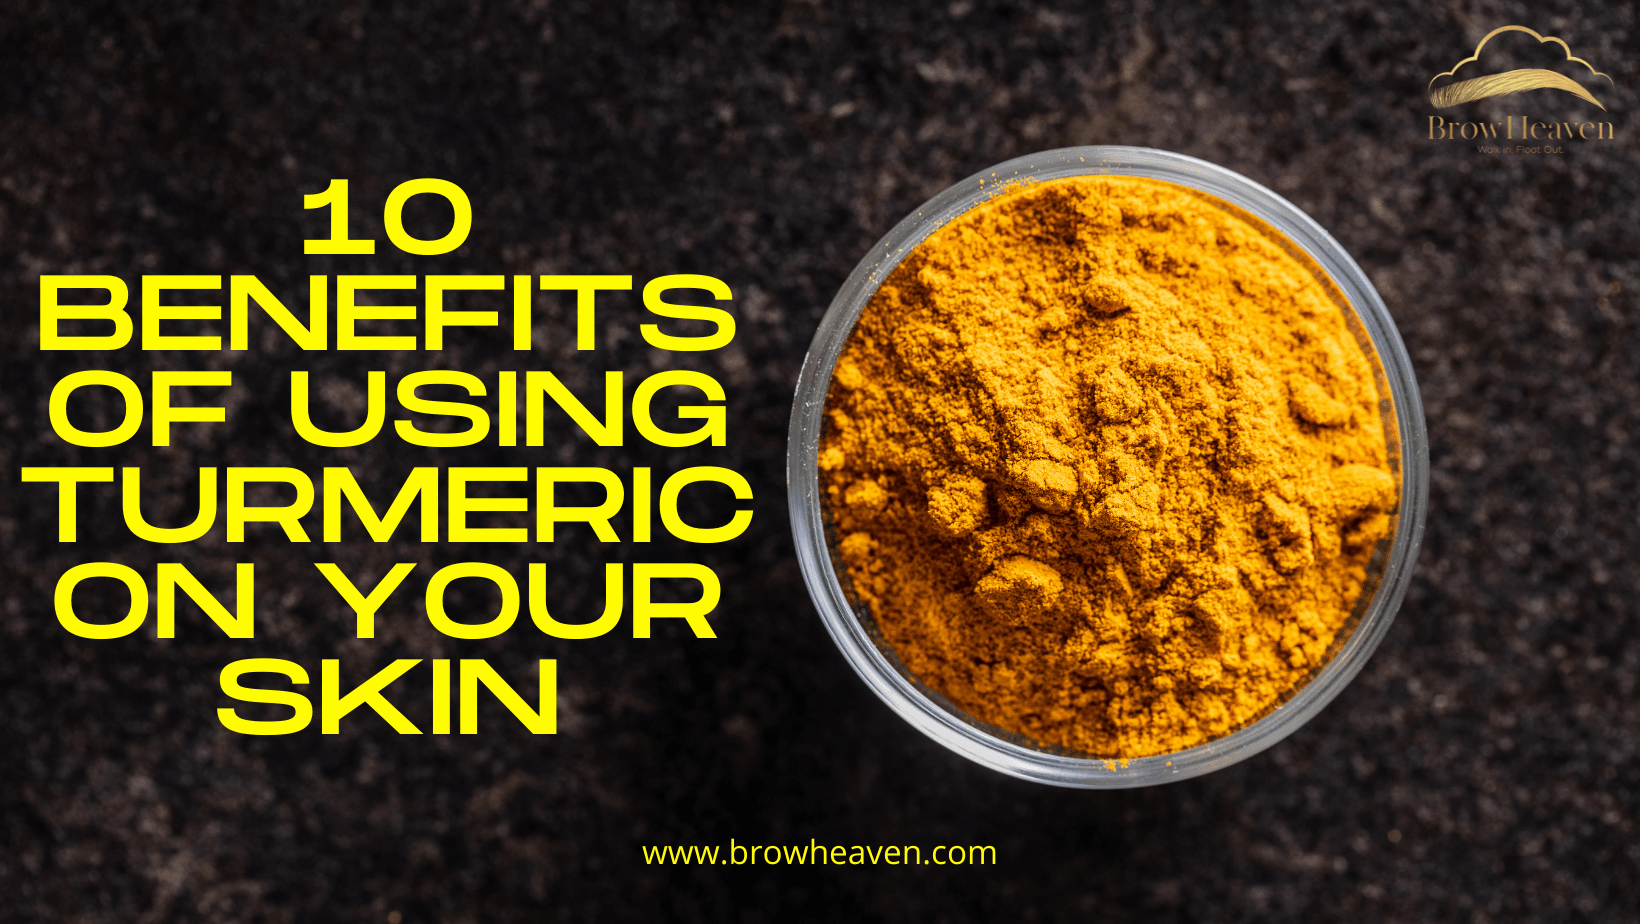 10 Benefits of Using Turmeric on Your Skin